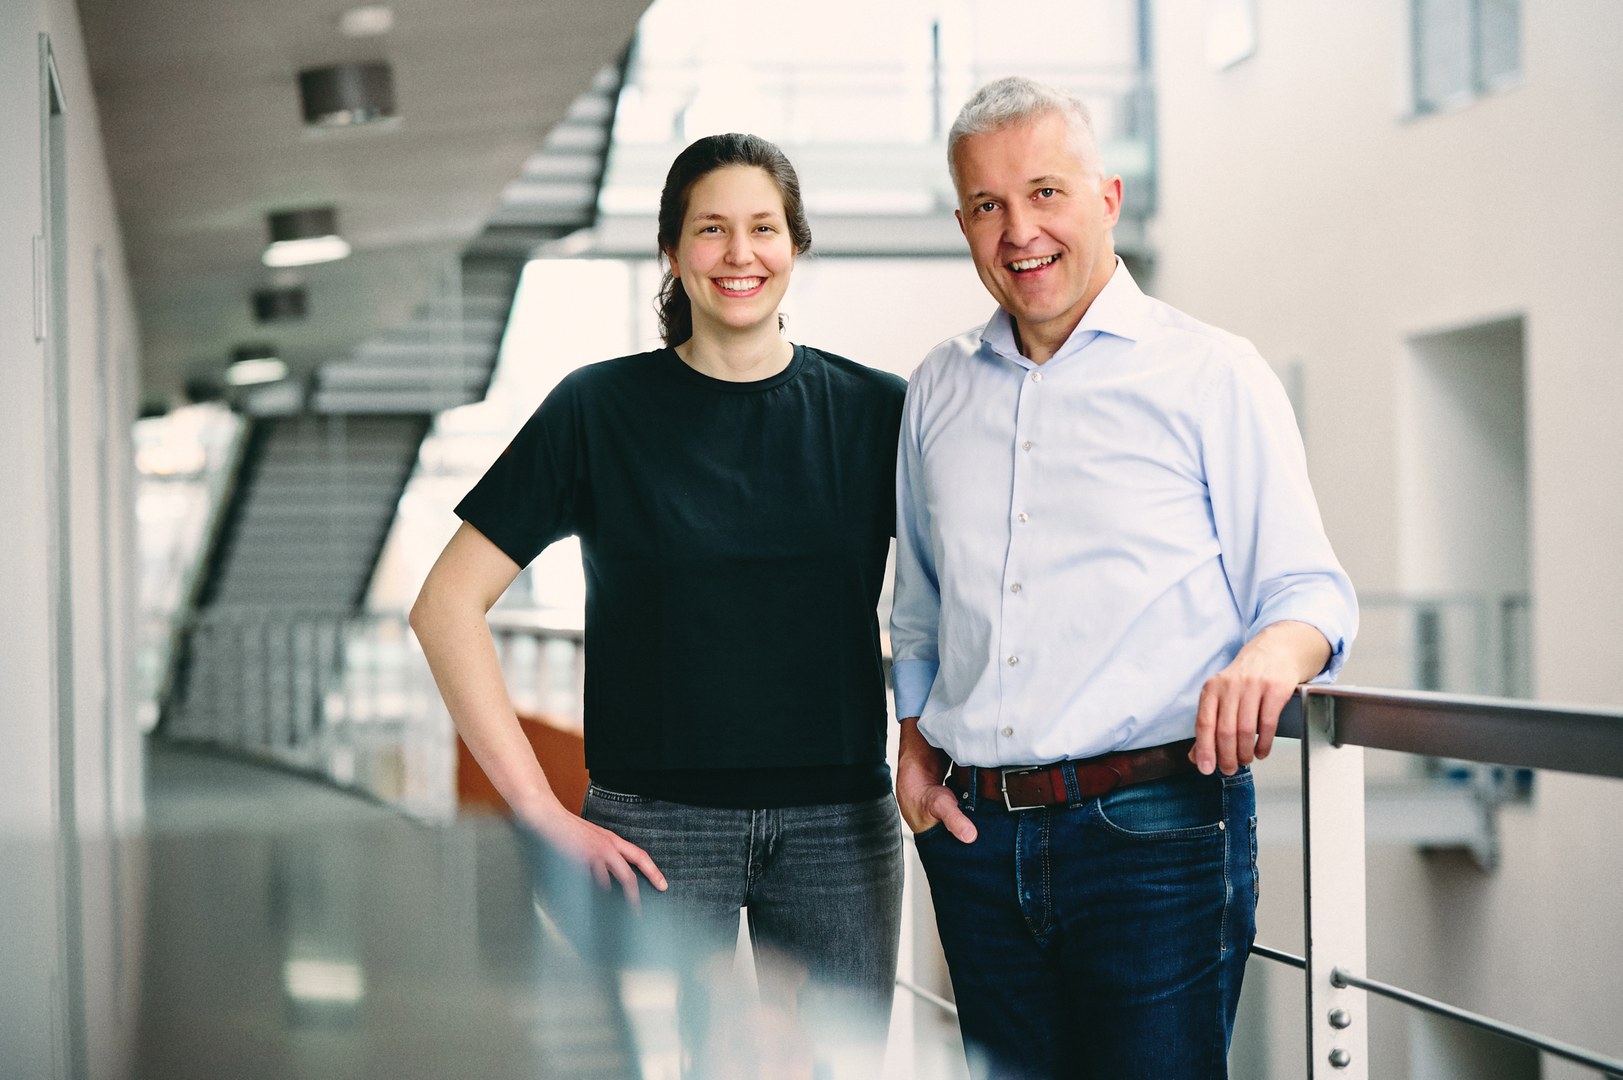 Doctorate student Inga Hochheiser and Prof. Matthias Geyer, - Director of the Institute of Structural Biology at the University Hospital Bonn.